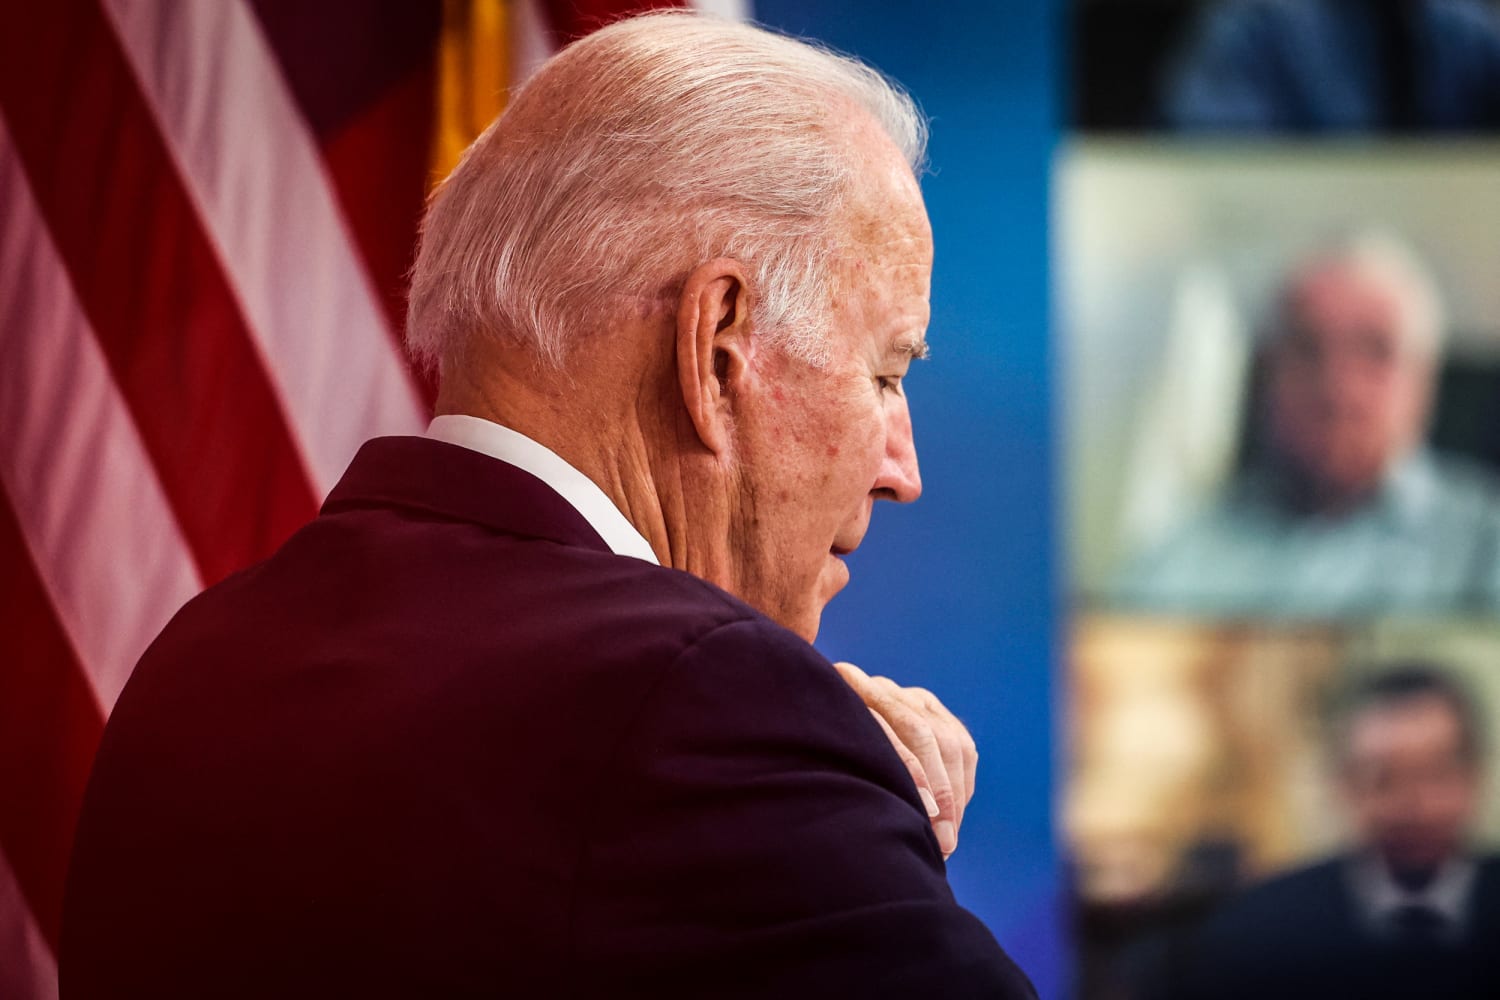 Biden says there’s ‘more work to do’ on Covid testing as Americans wait days for results